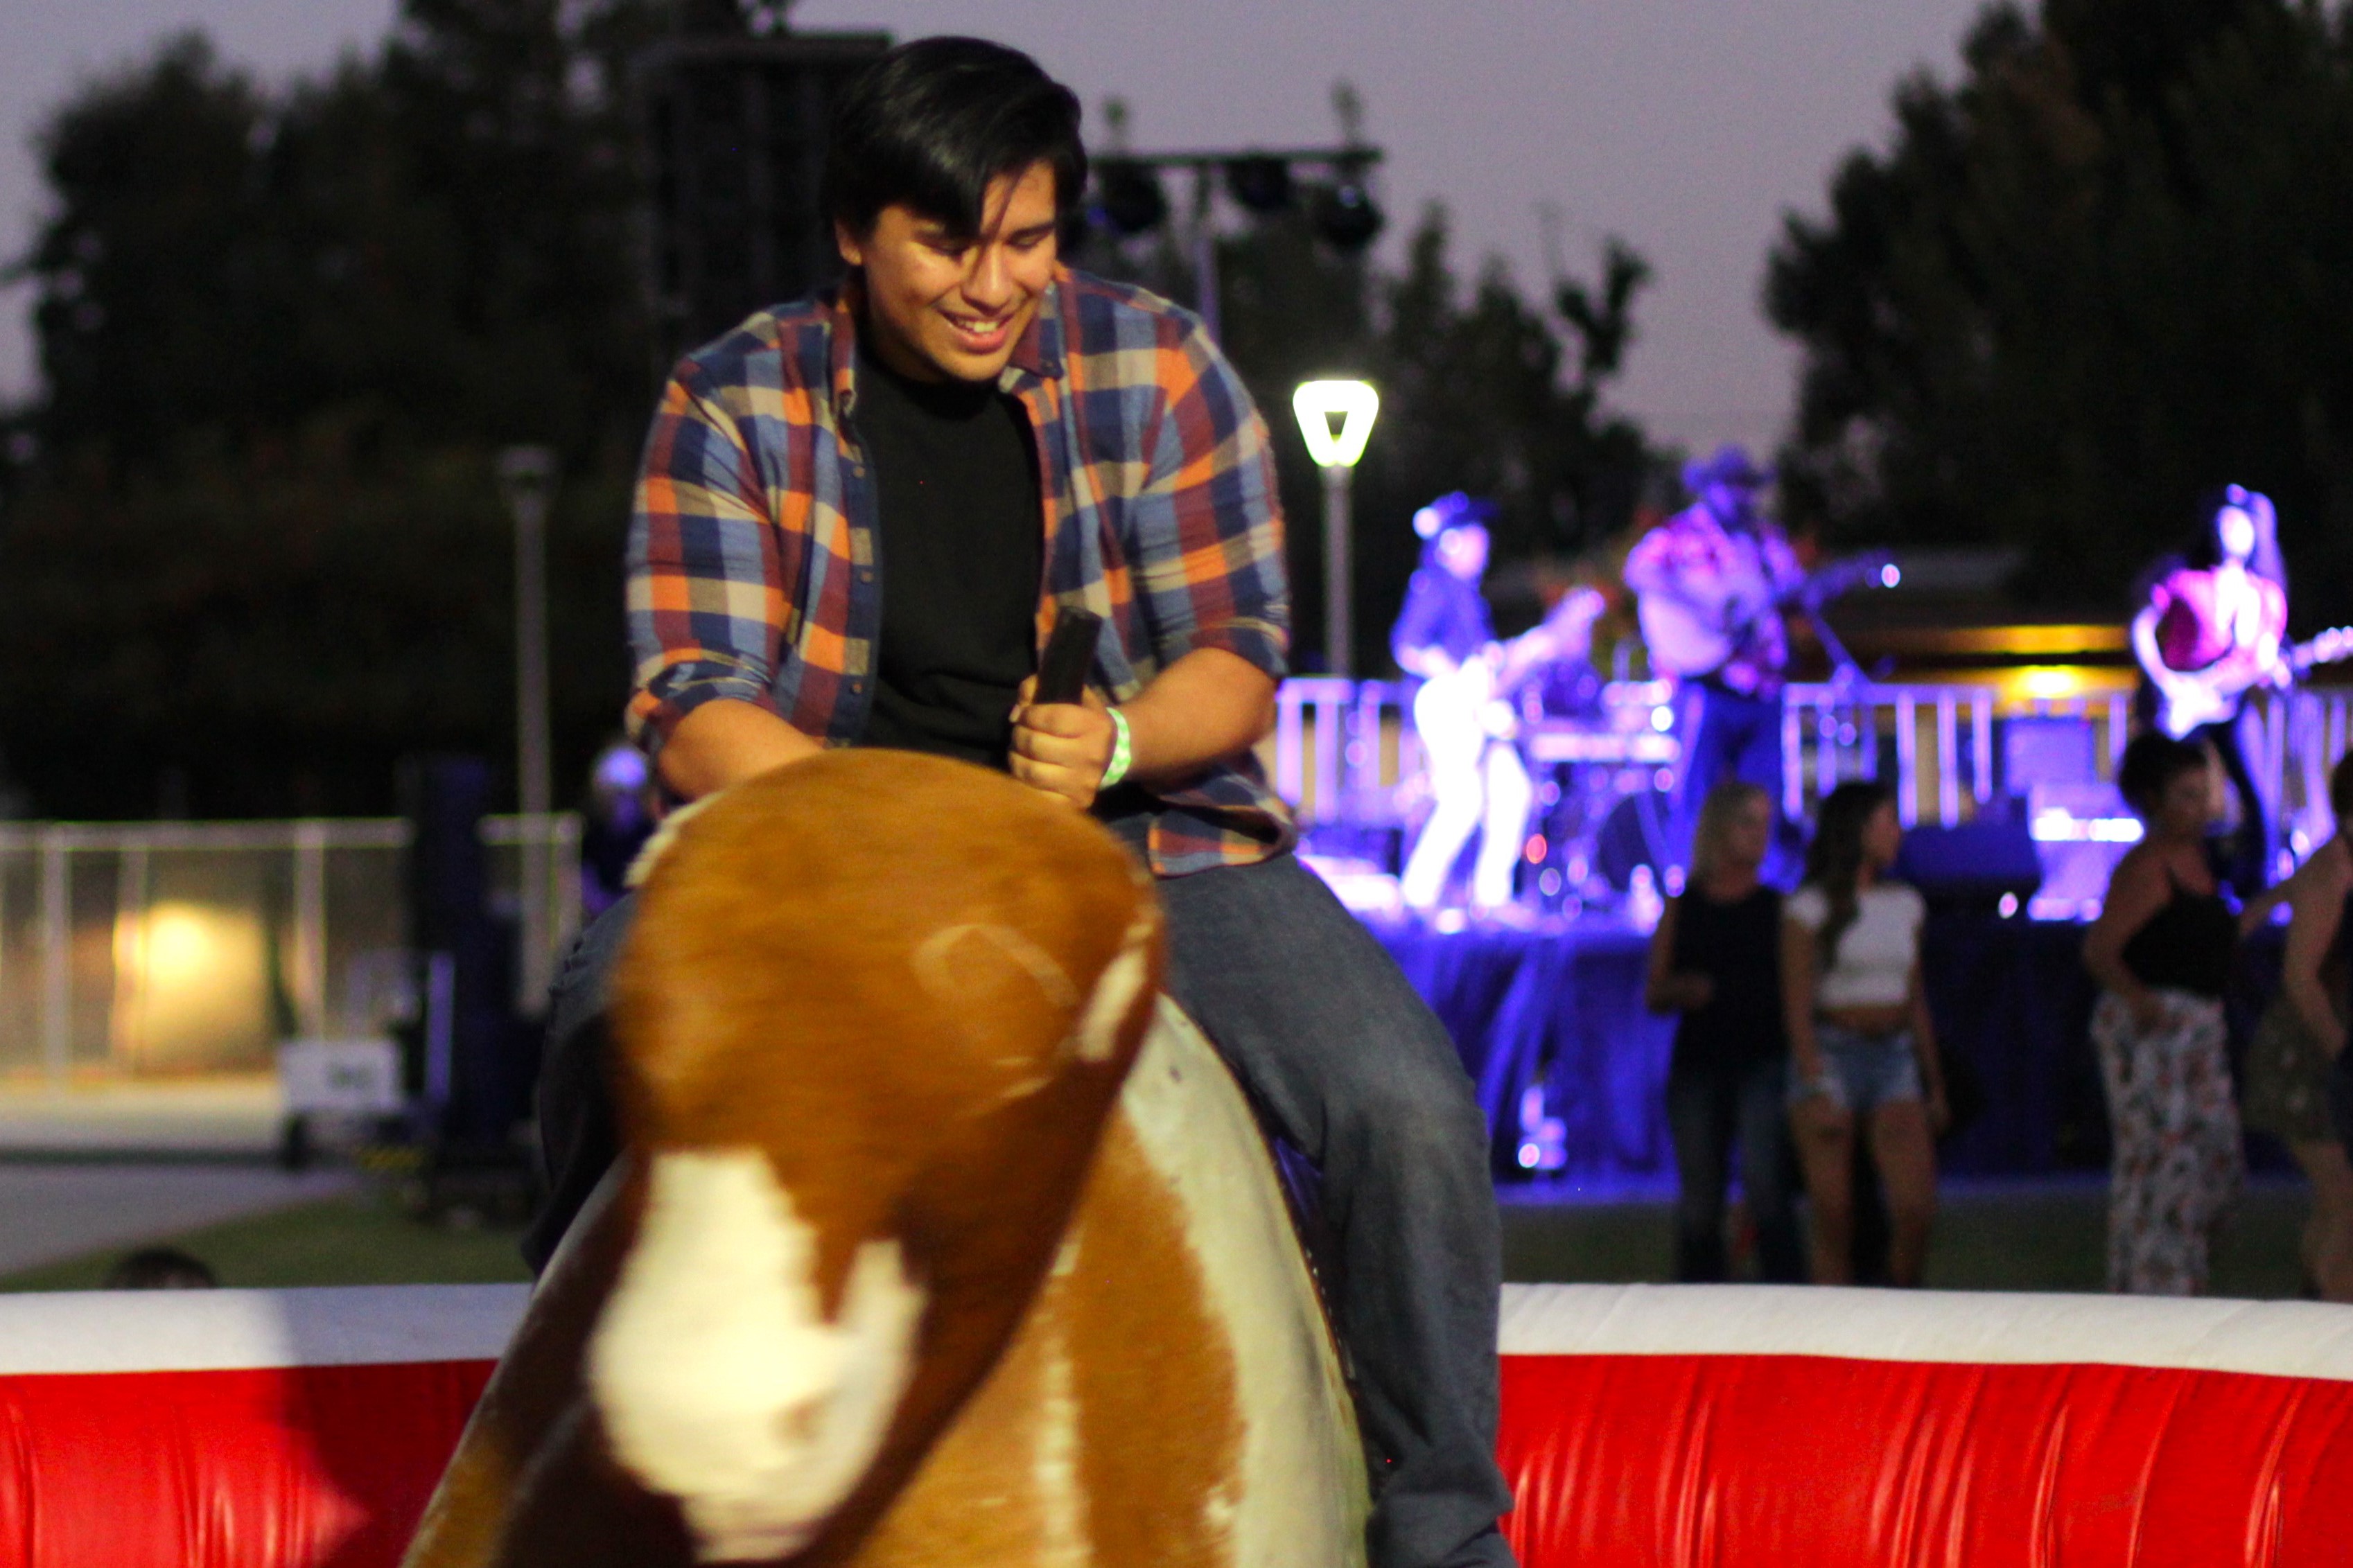 A student enjoys the mechanical bull at a night event